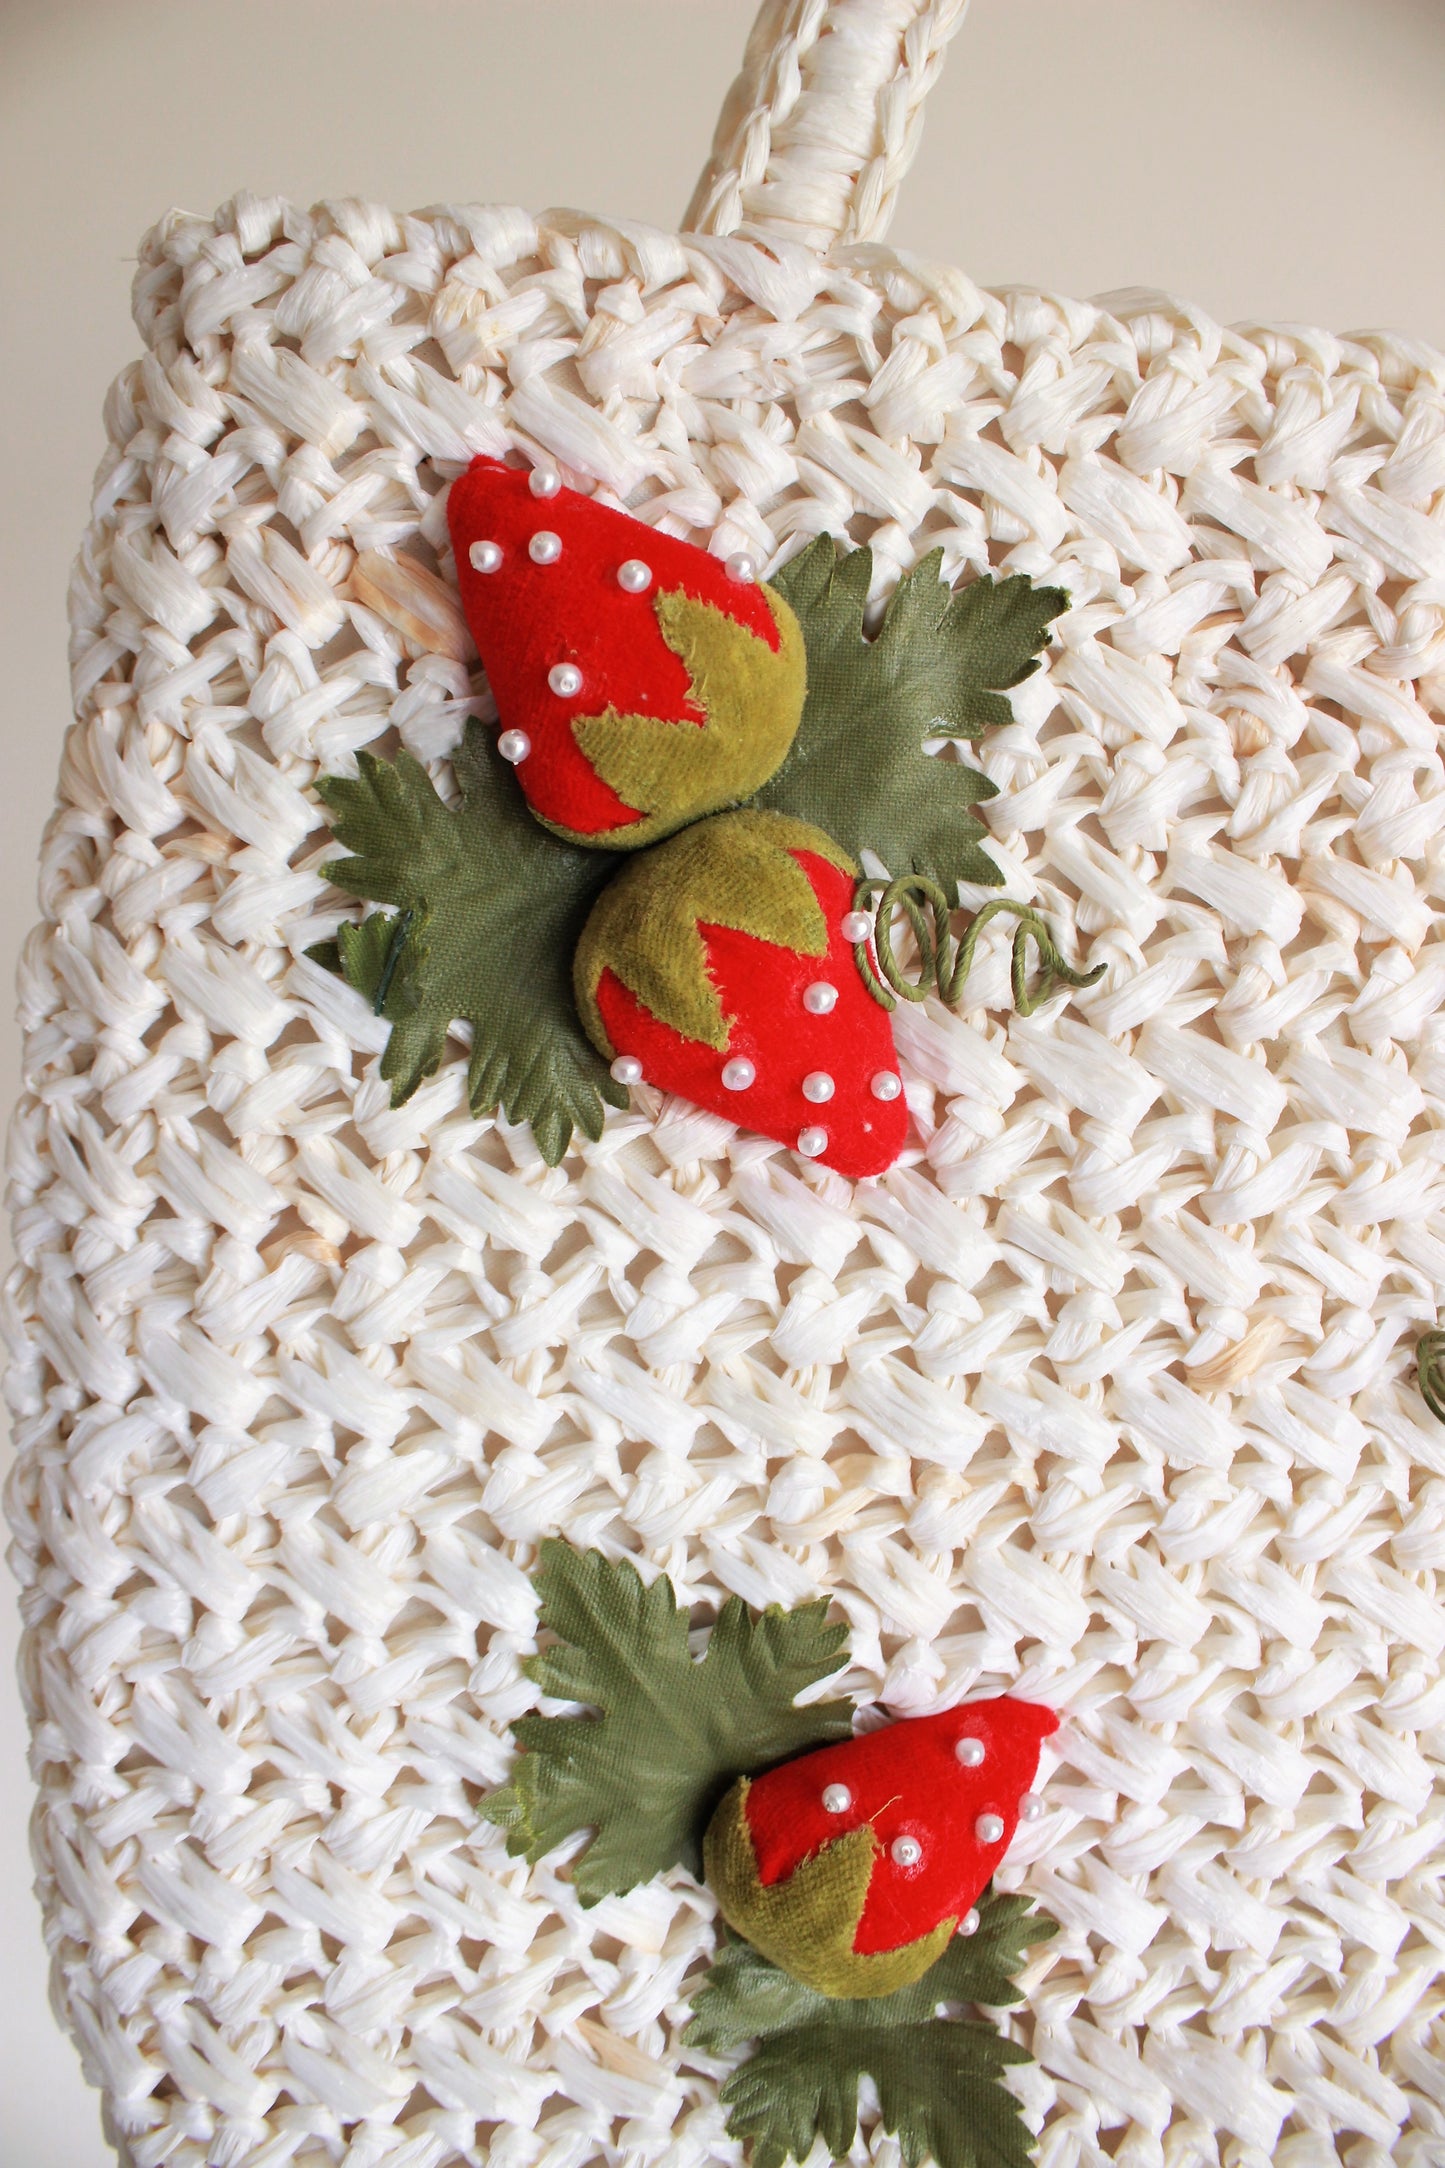 Vintage 1960s White Straw Purse With Strawberries by Magid